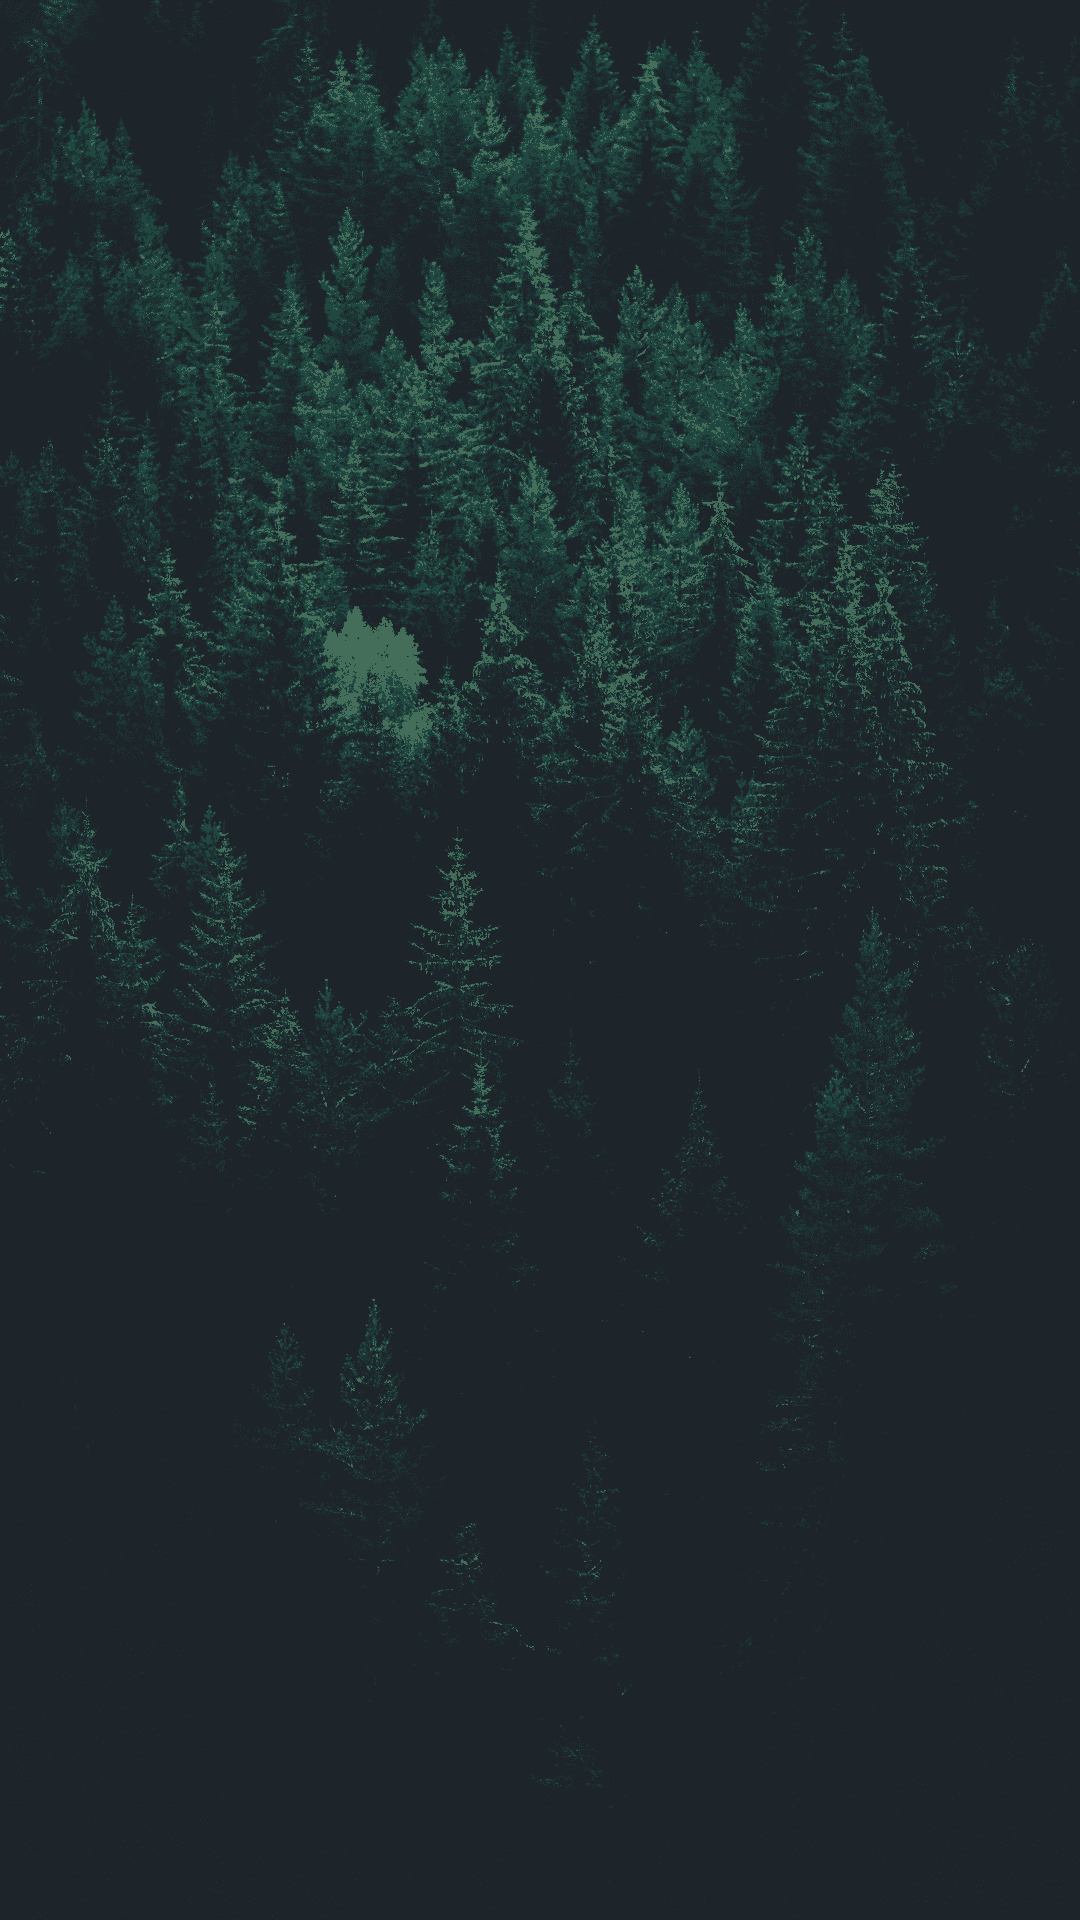 A forest of trees in a dark green color. - Slytherin